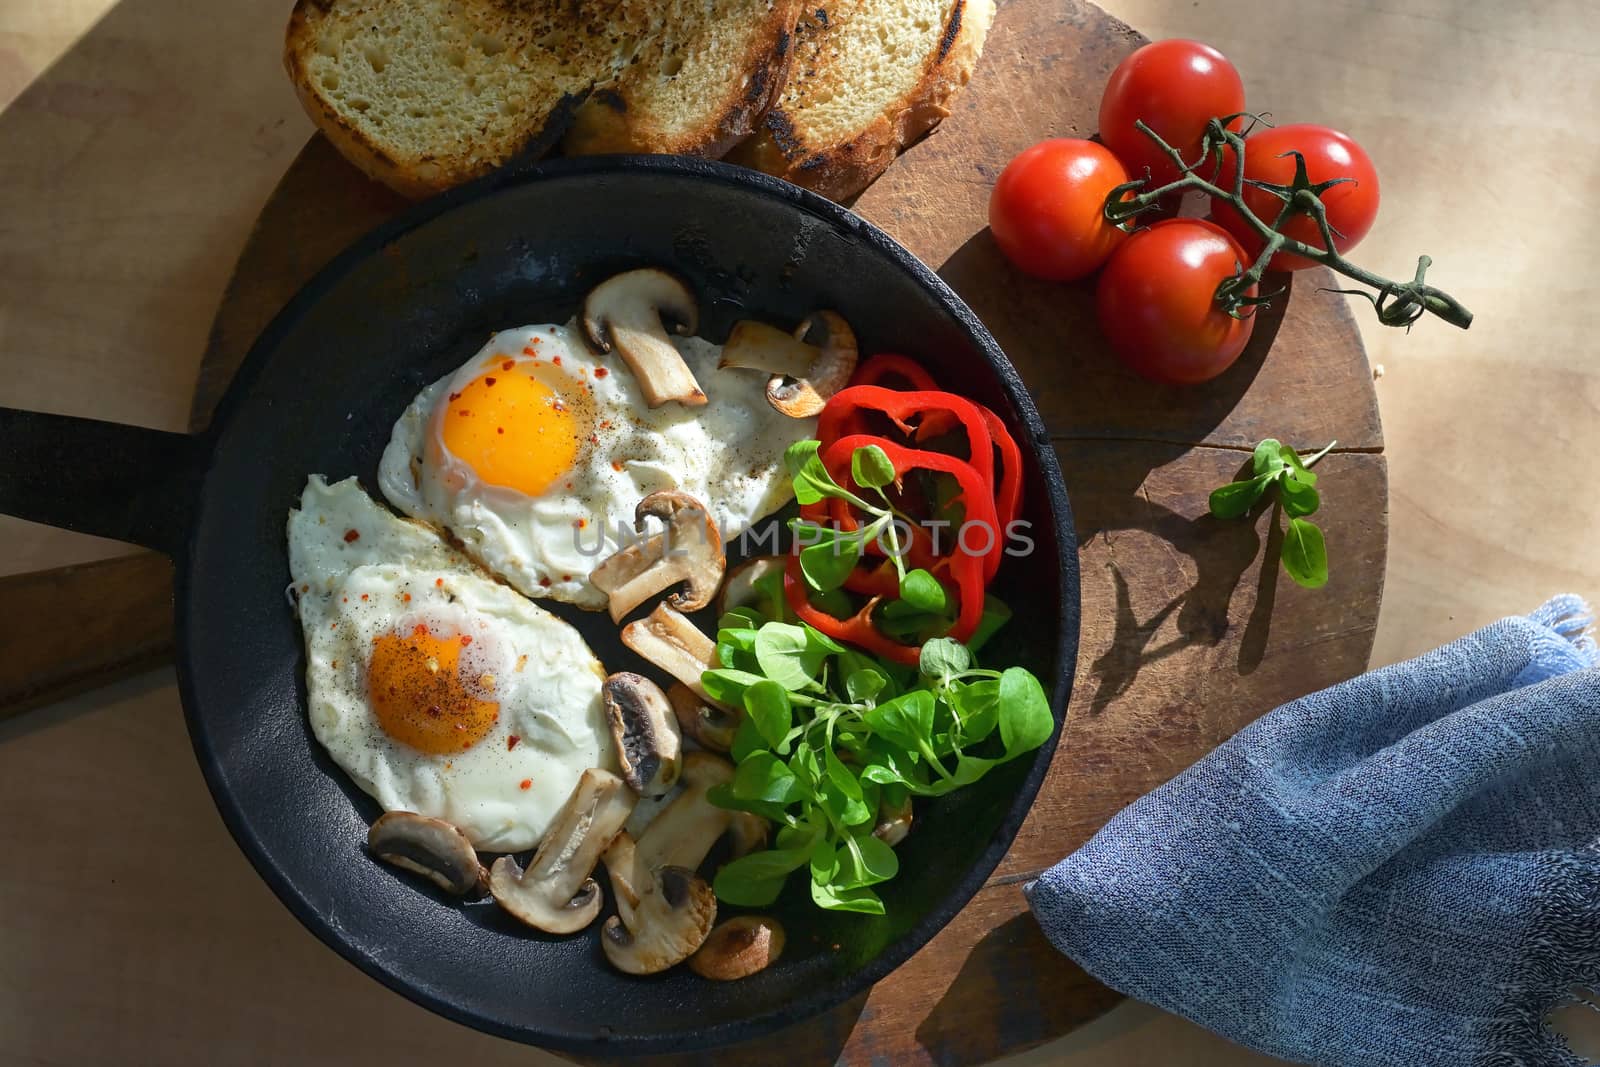 Fried Eggs And Vegetables In A Frying Pan